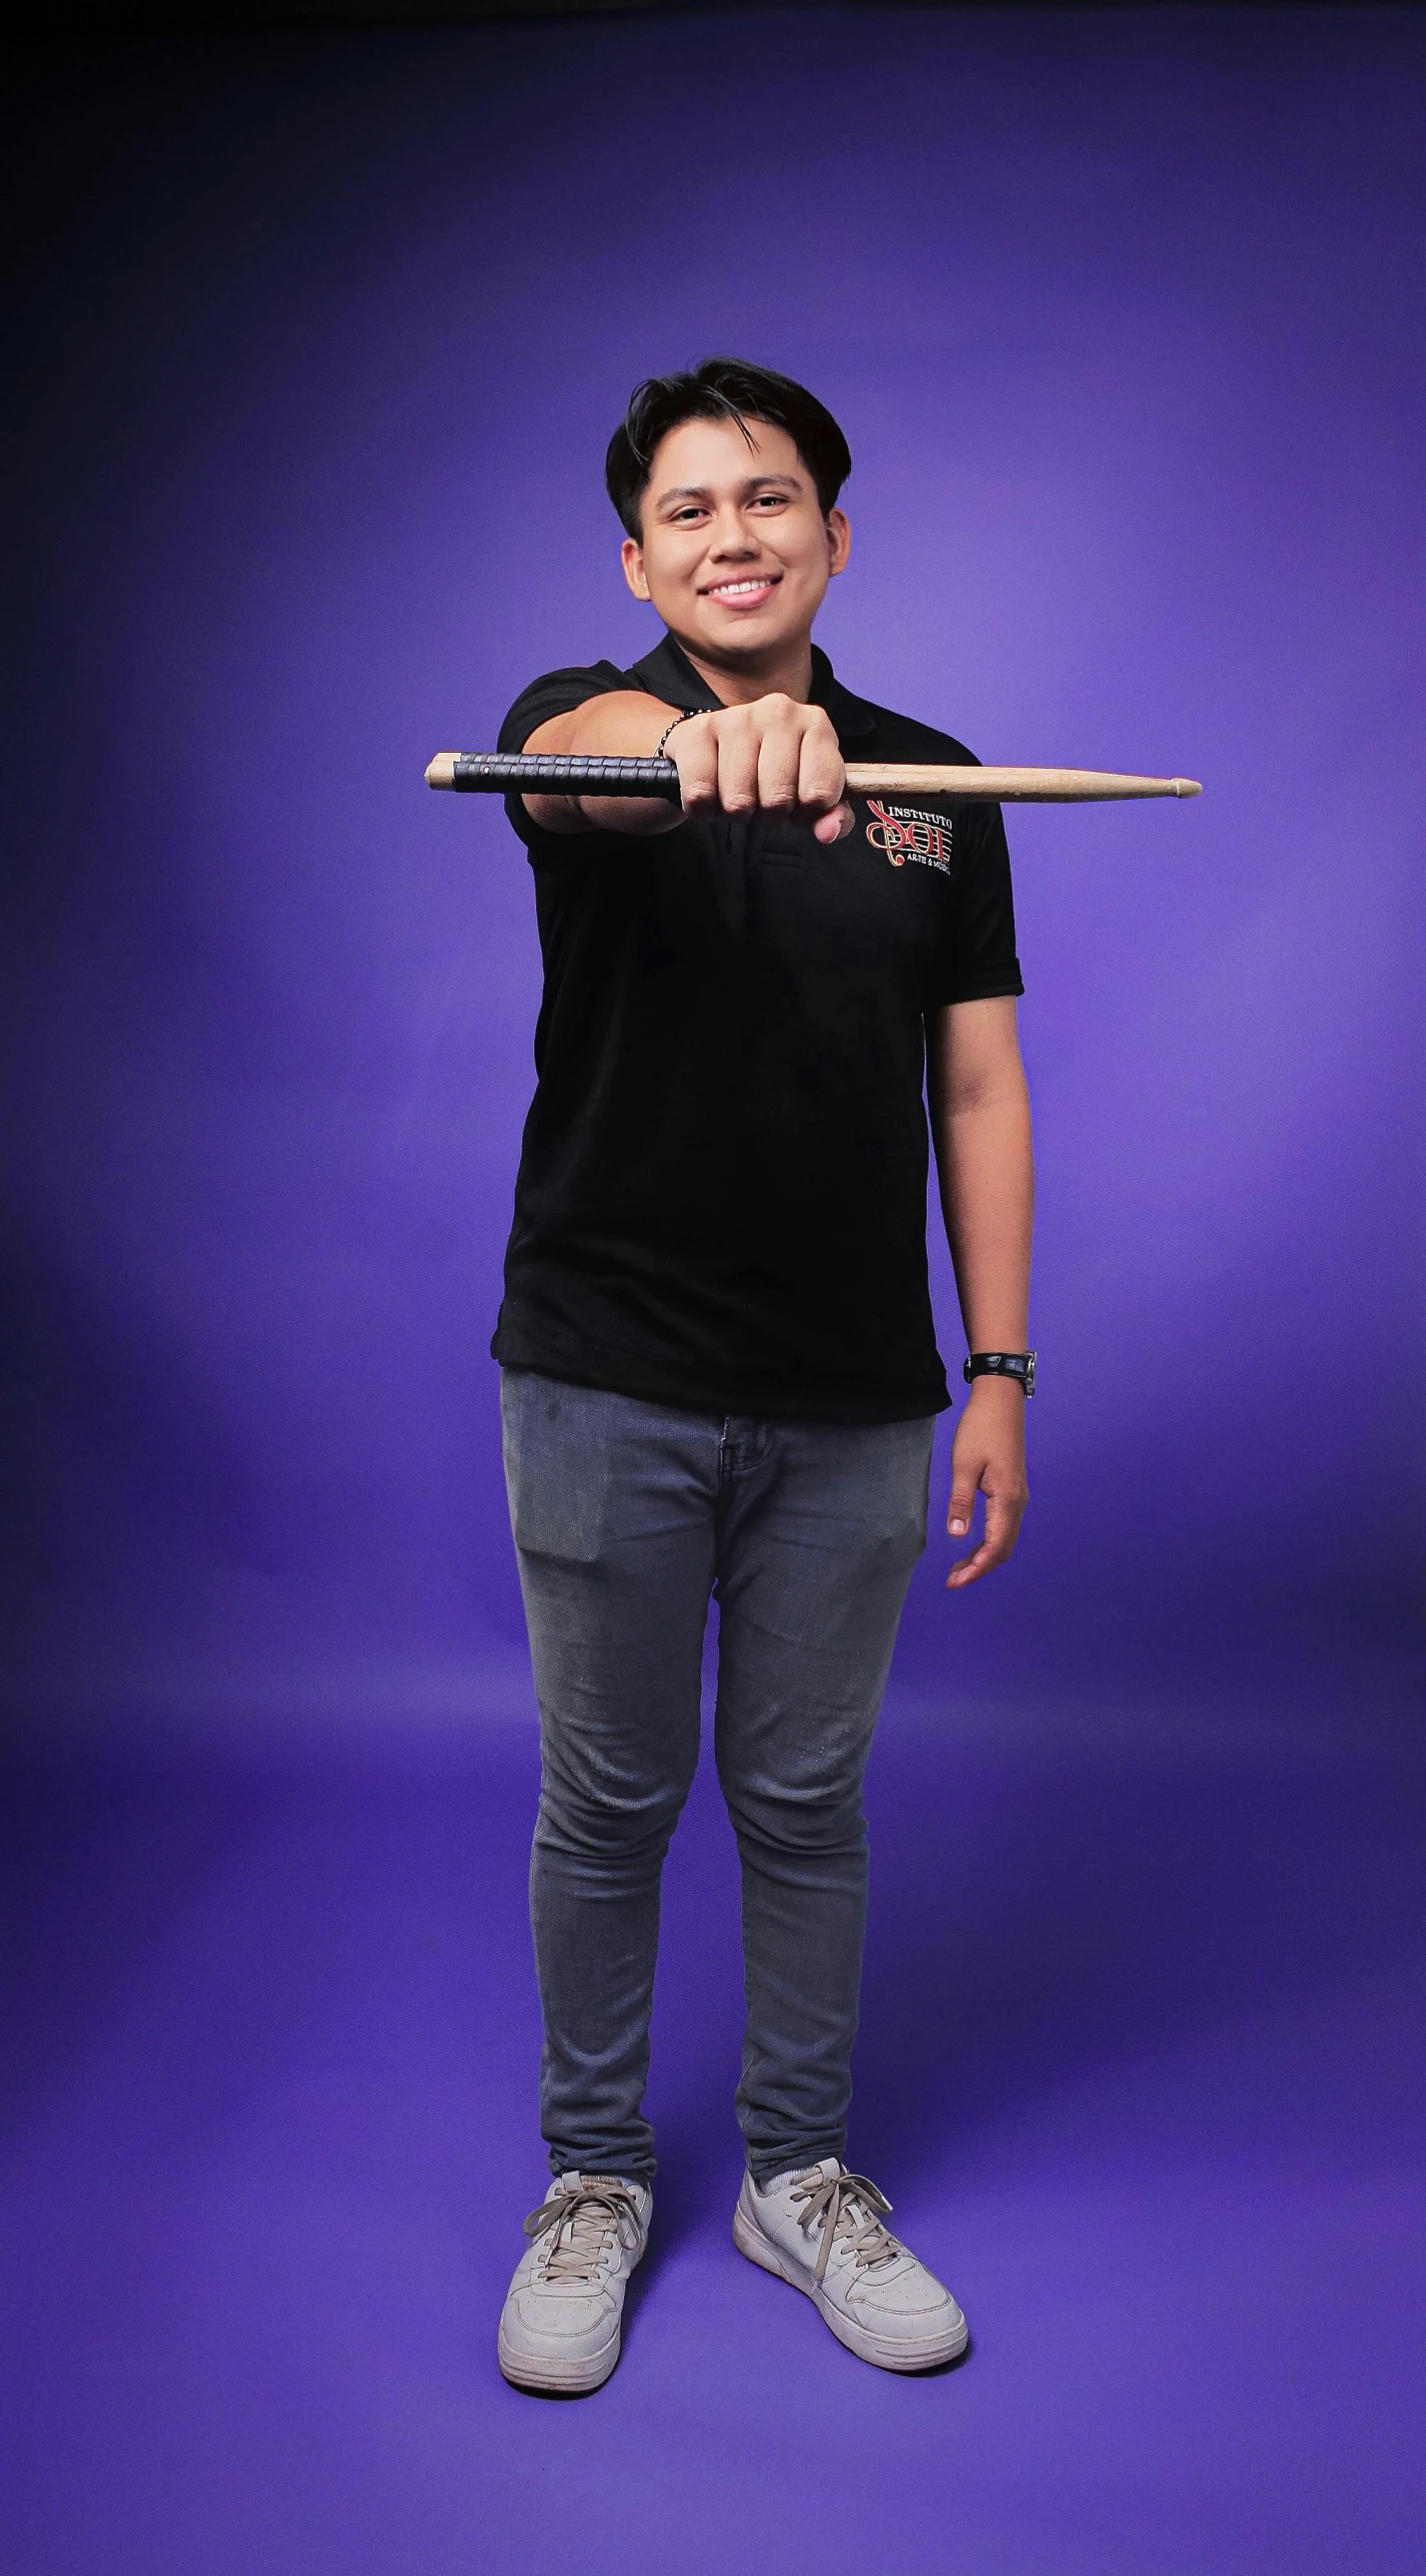 a smiling man holding a baseball bat with purple backdrop